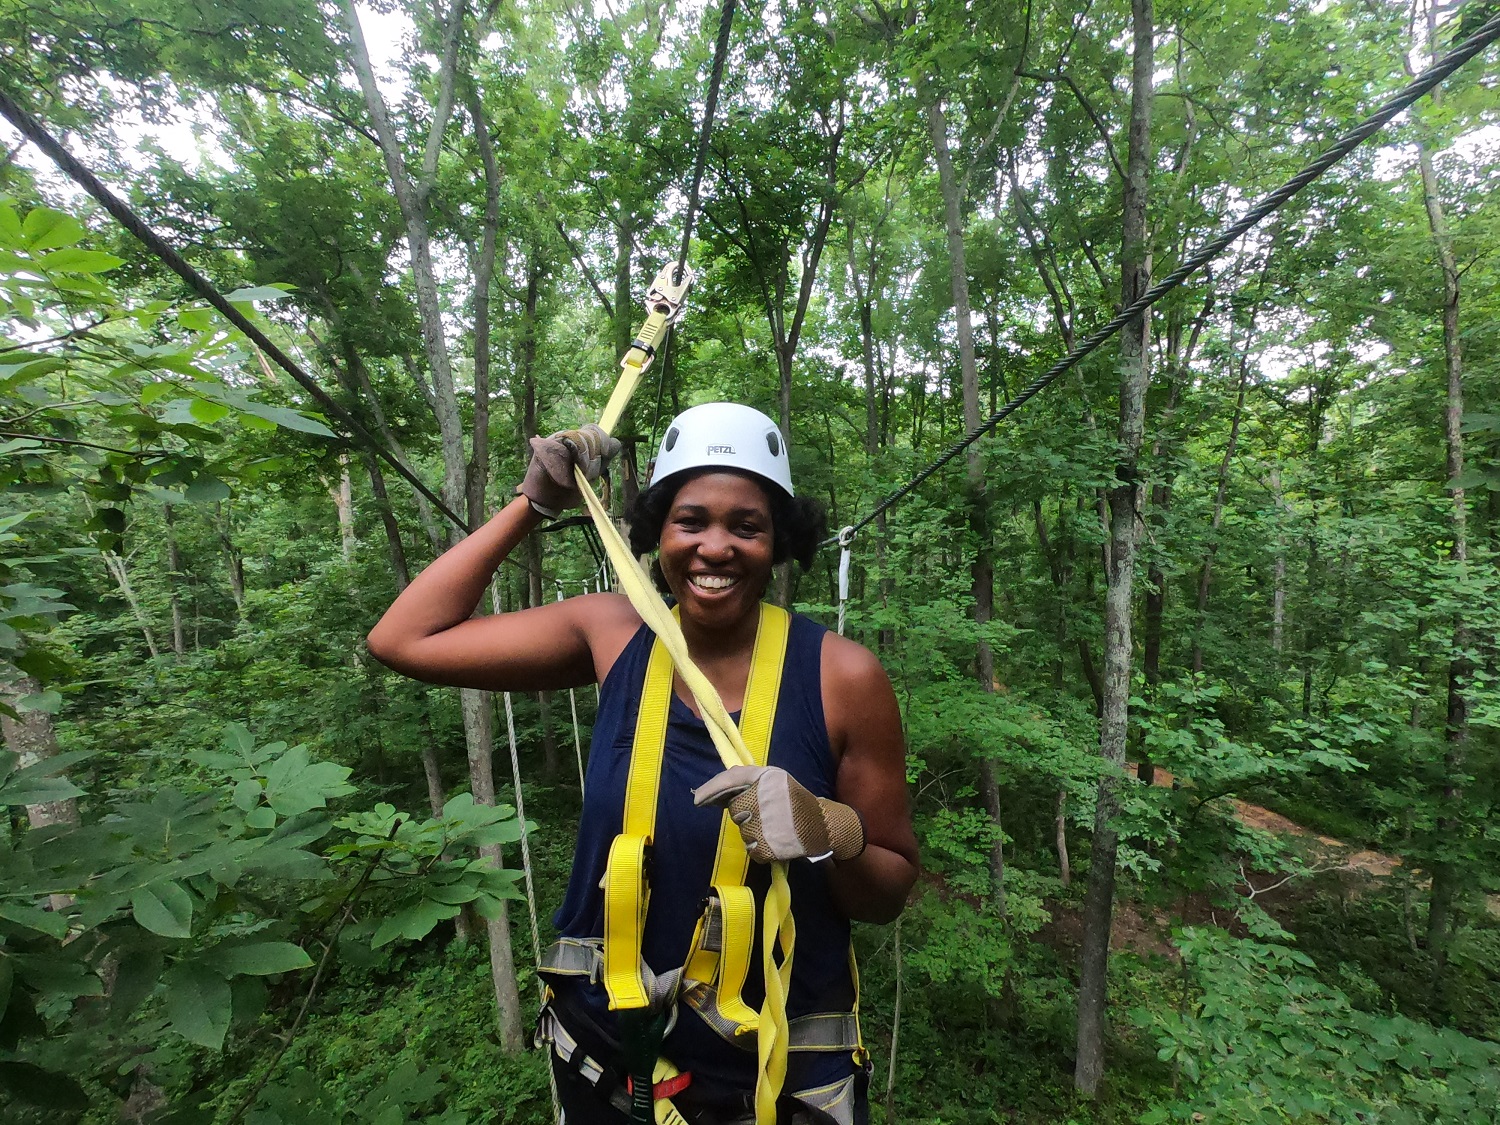 Image of CGD Gender Equality and Inclusion Co-Director, Kehinde Ajayi, ziplining.